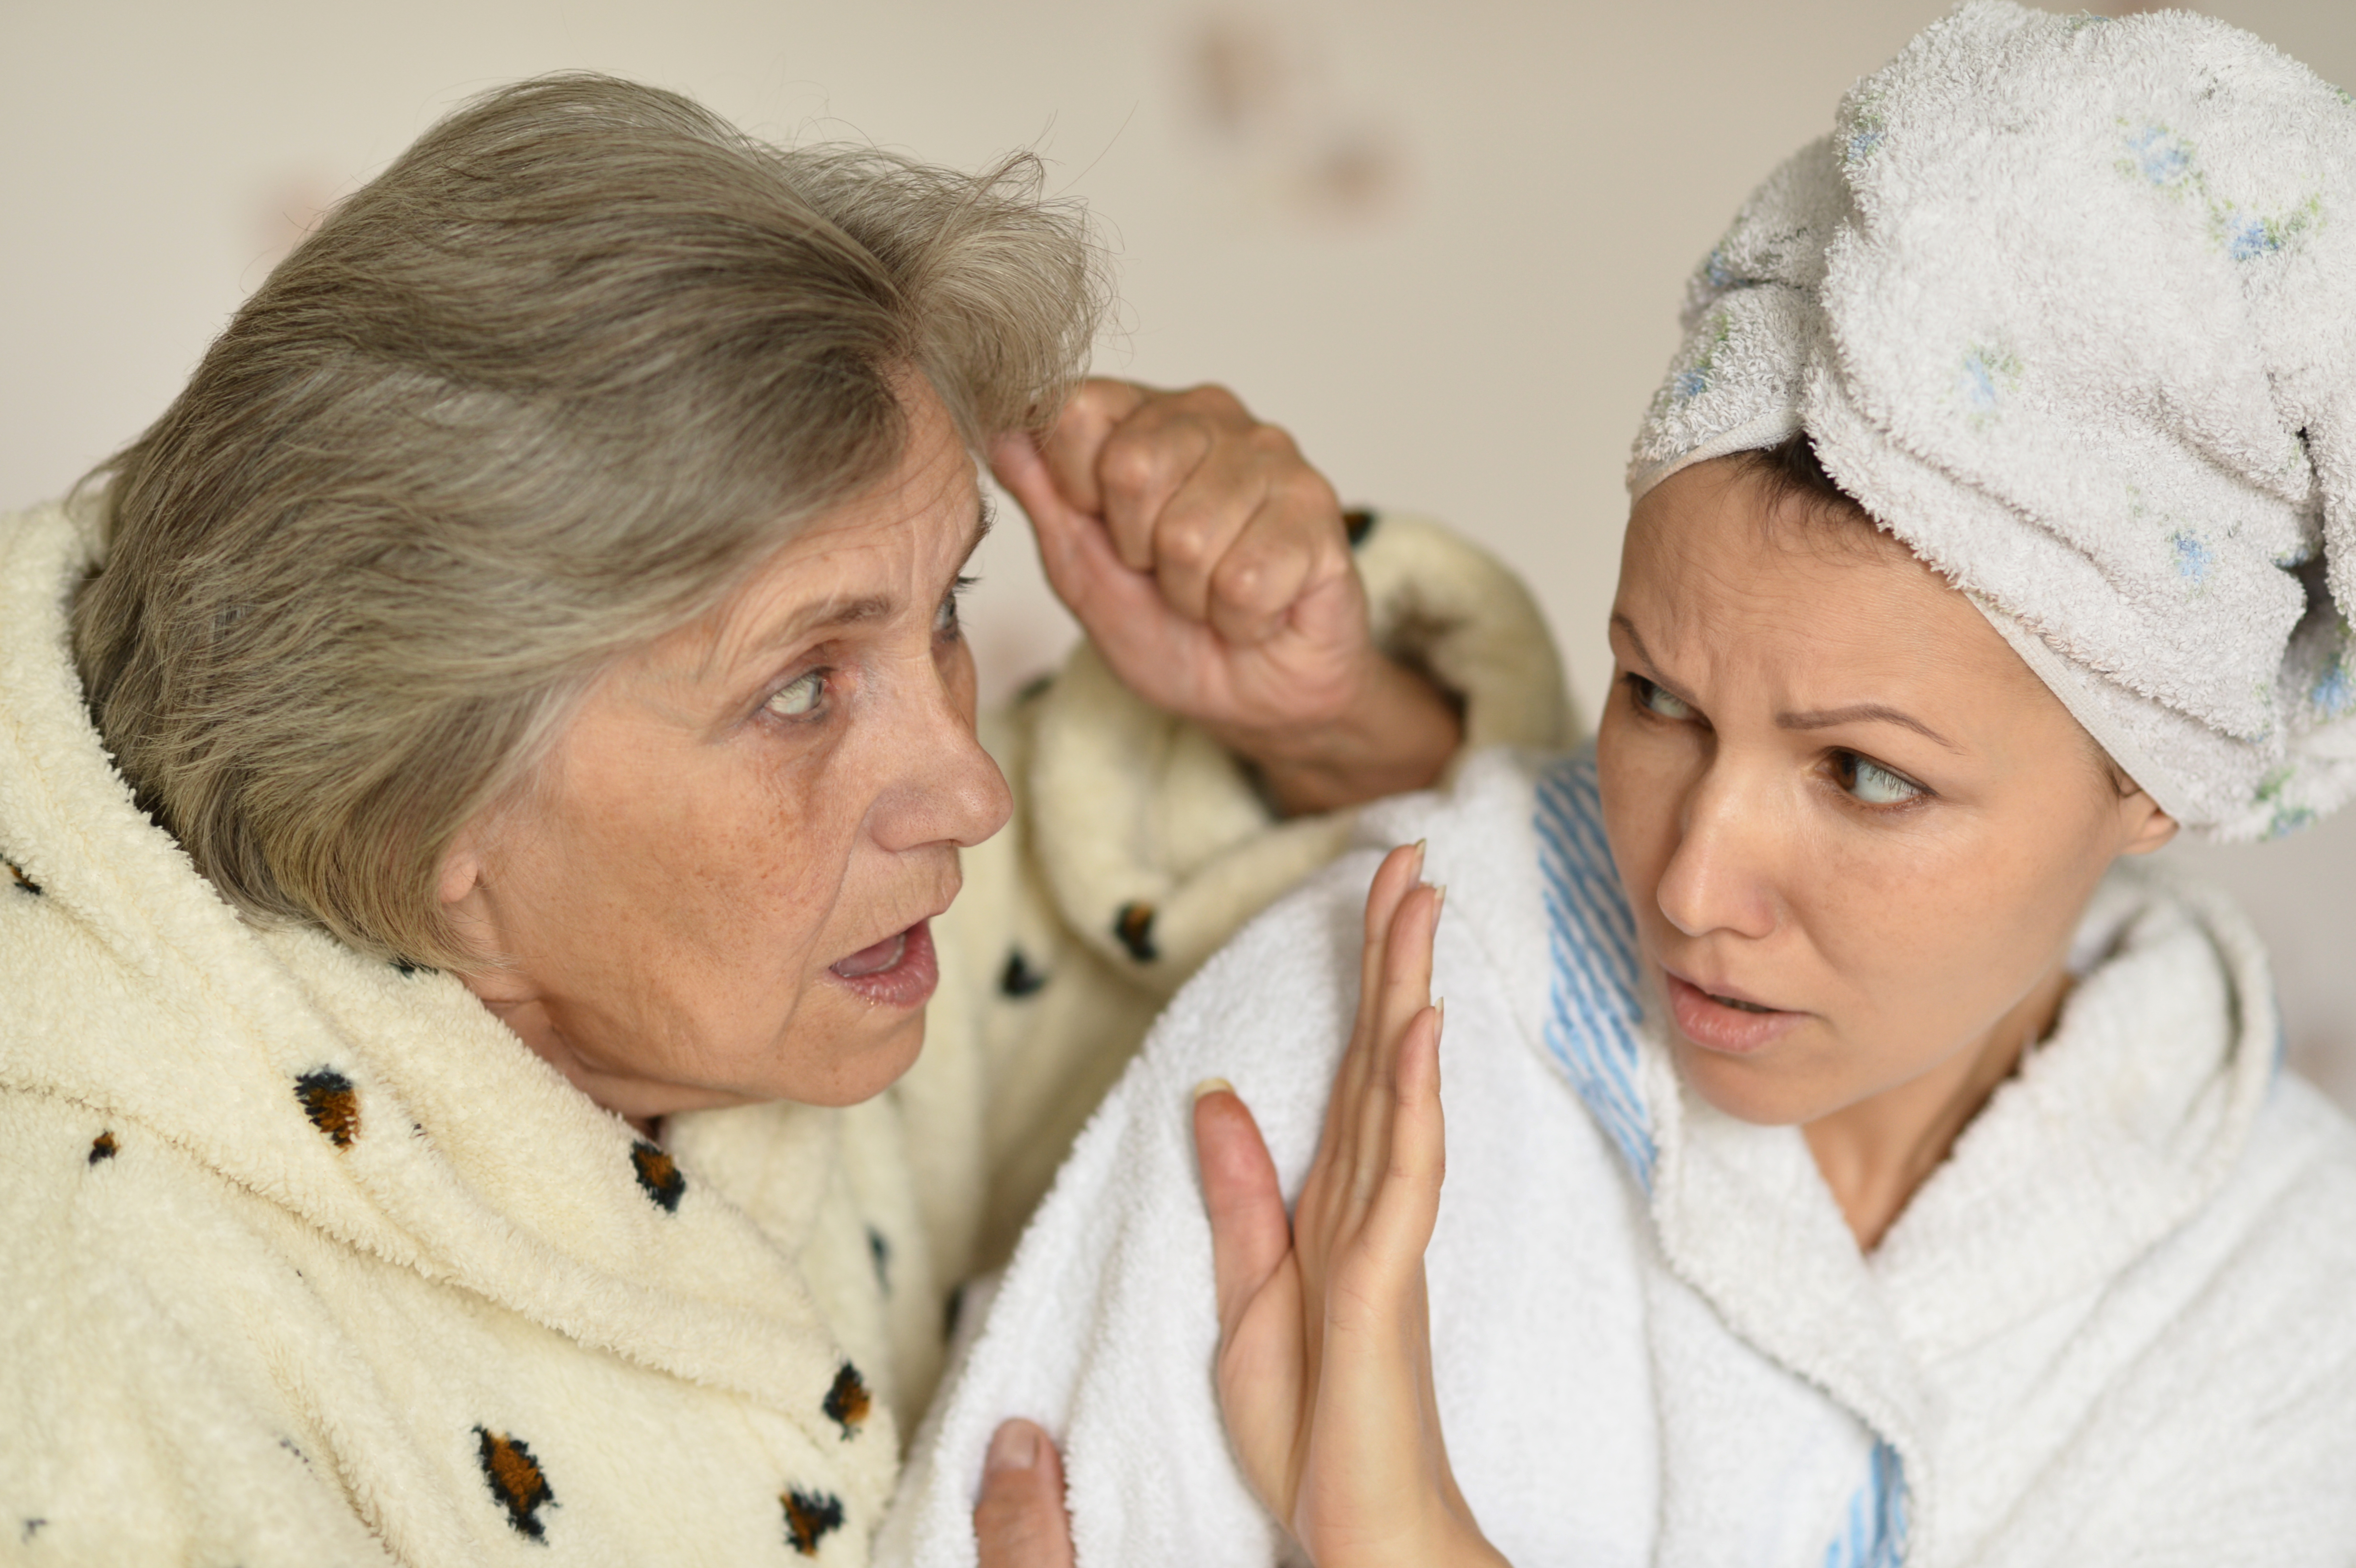 A woman gesturing to her mother-in-law while the older lady angrily raises her hand at her | Source: Shutterstock